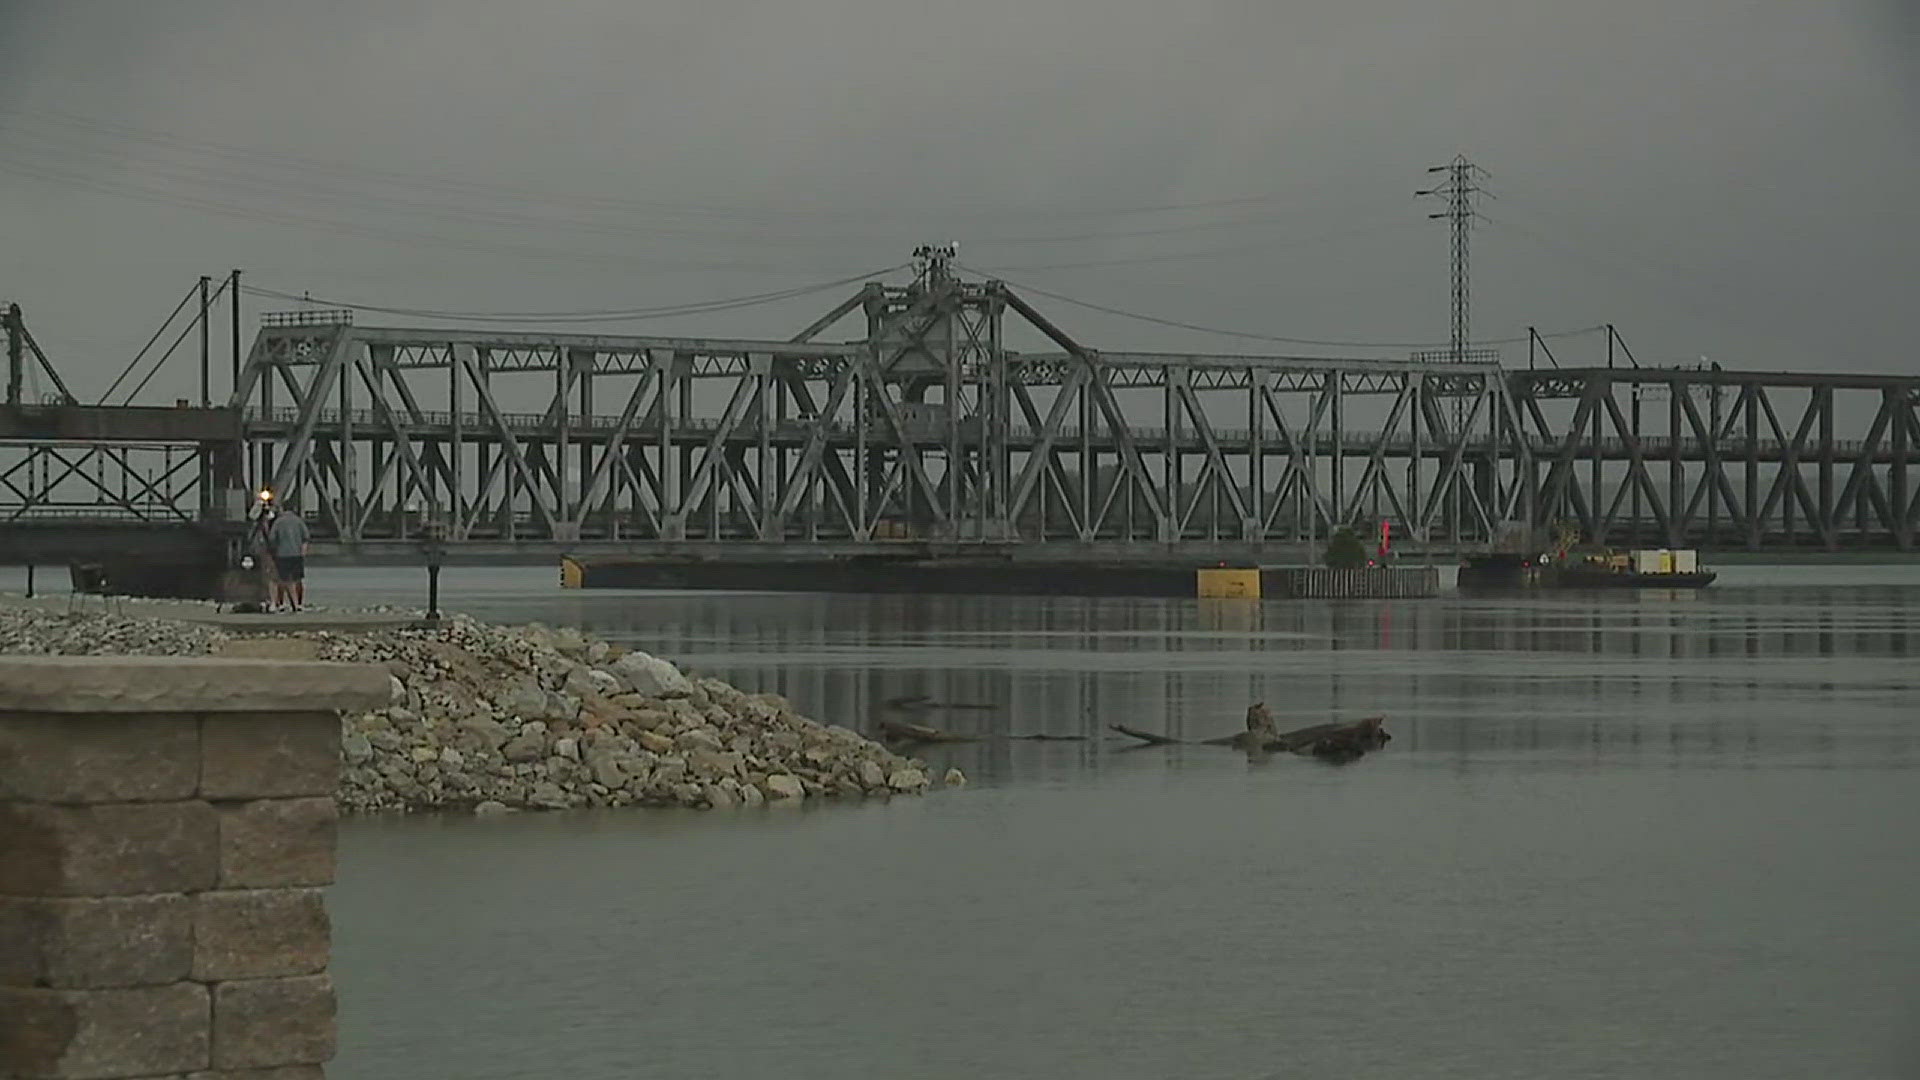 The Fort Madison Bridge has reopened after being struck by a barge Thursday afternoon. The barge was resting partially submerged in the Mississippi River afterward.